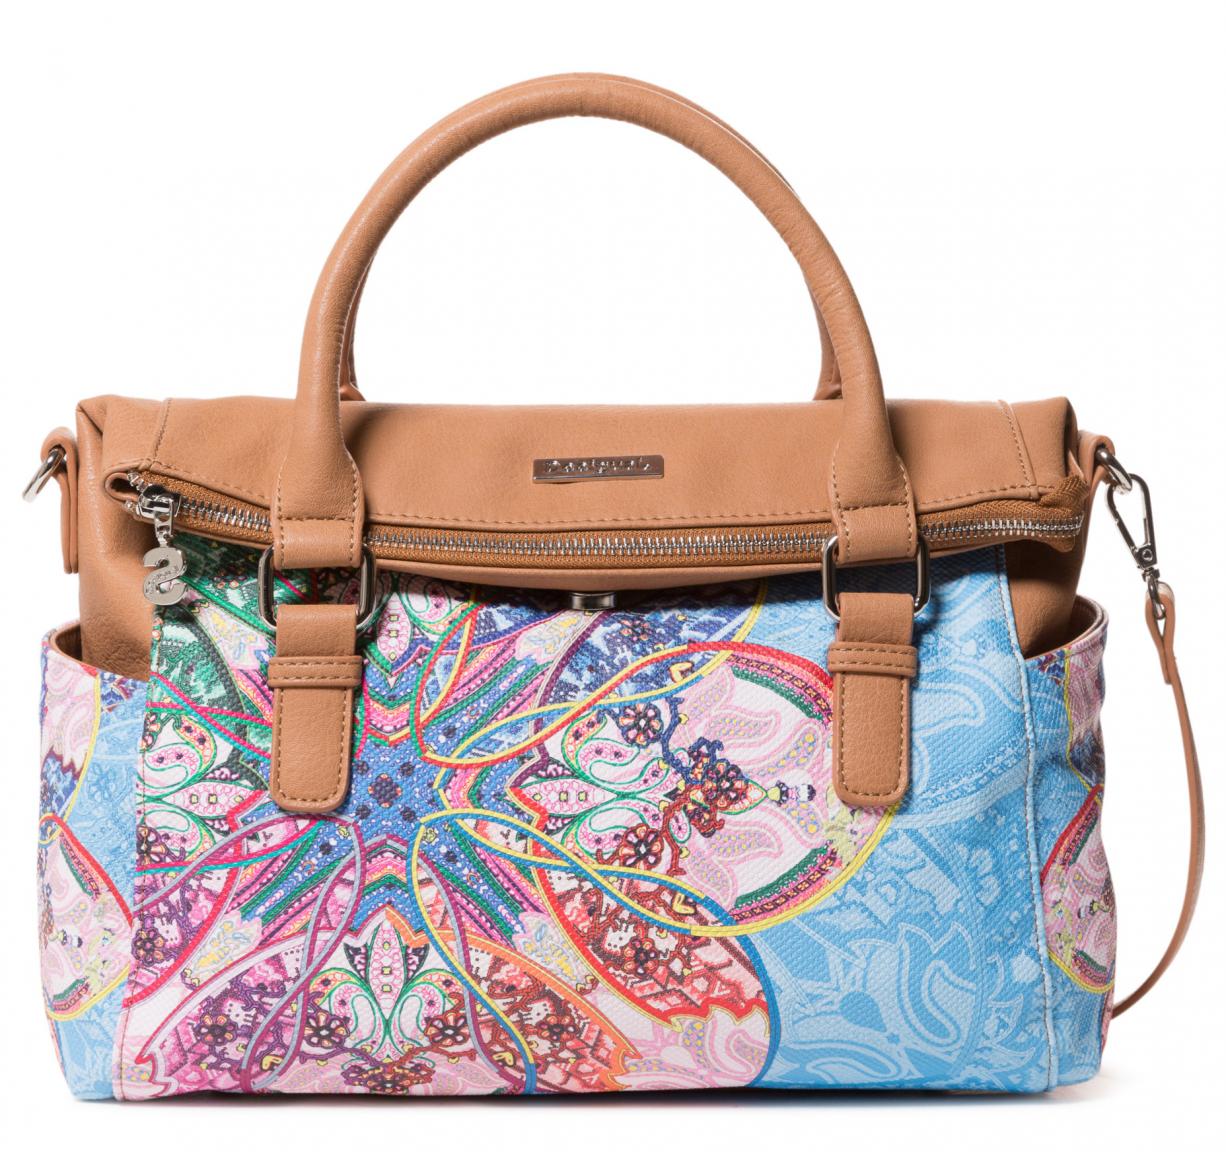 Desigual farbenfrohe Handtasche Loverty Mexican Cards ...